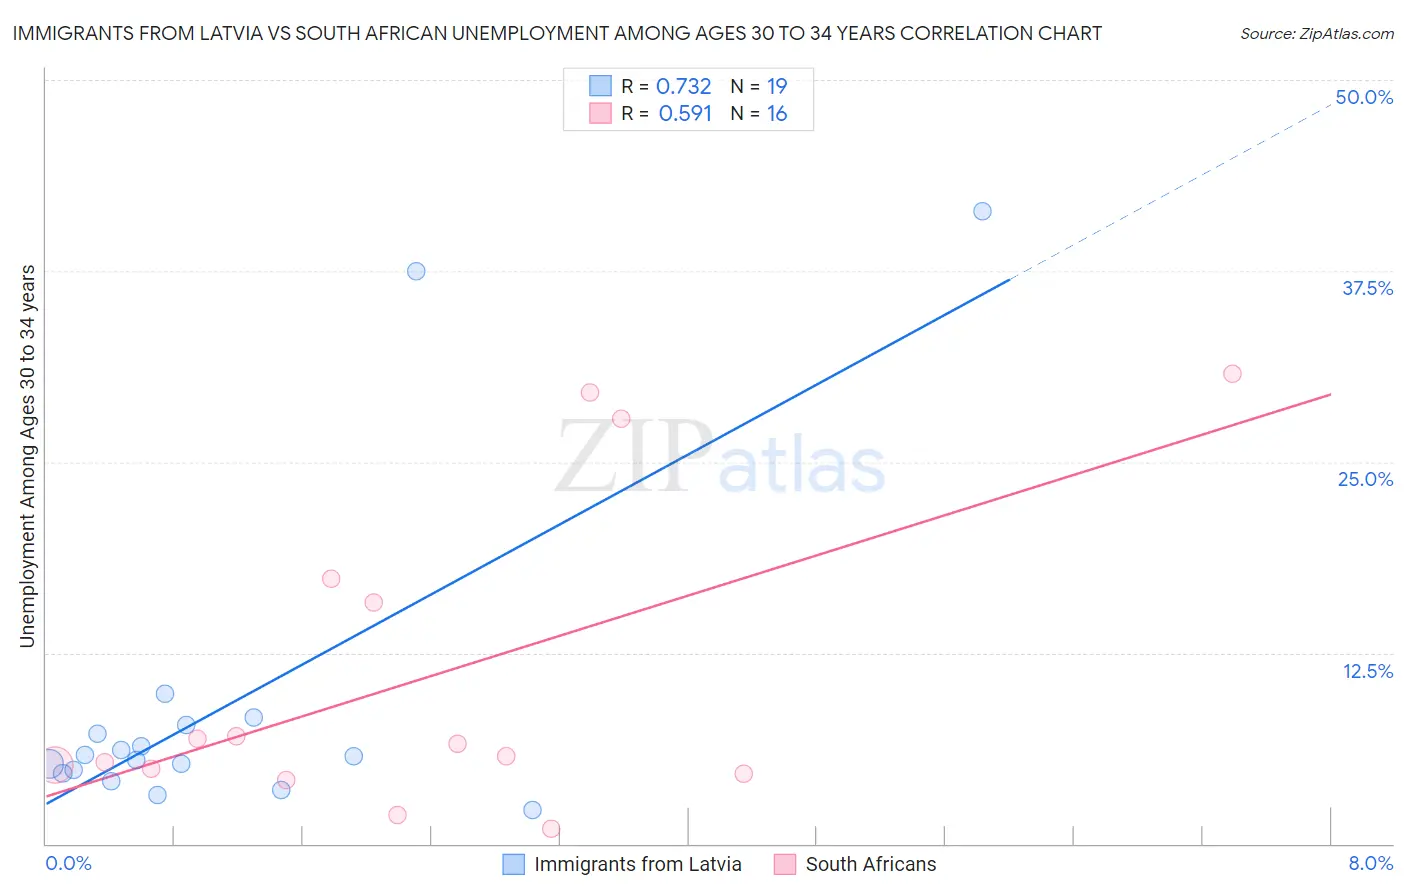 Immigrants from Latvia vs South African Unemployment Among Ages 30 to 34 years